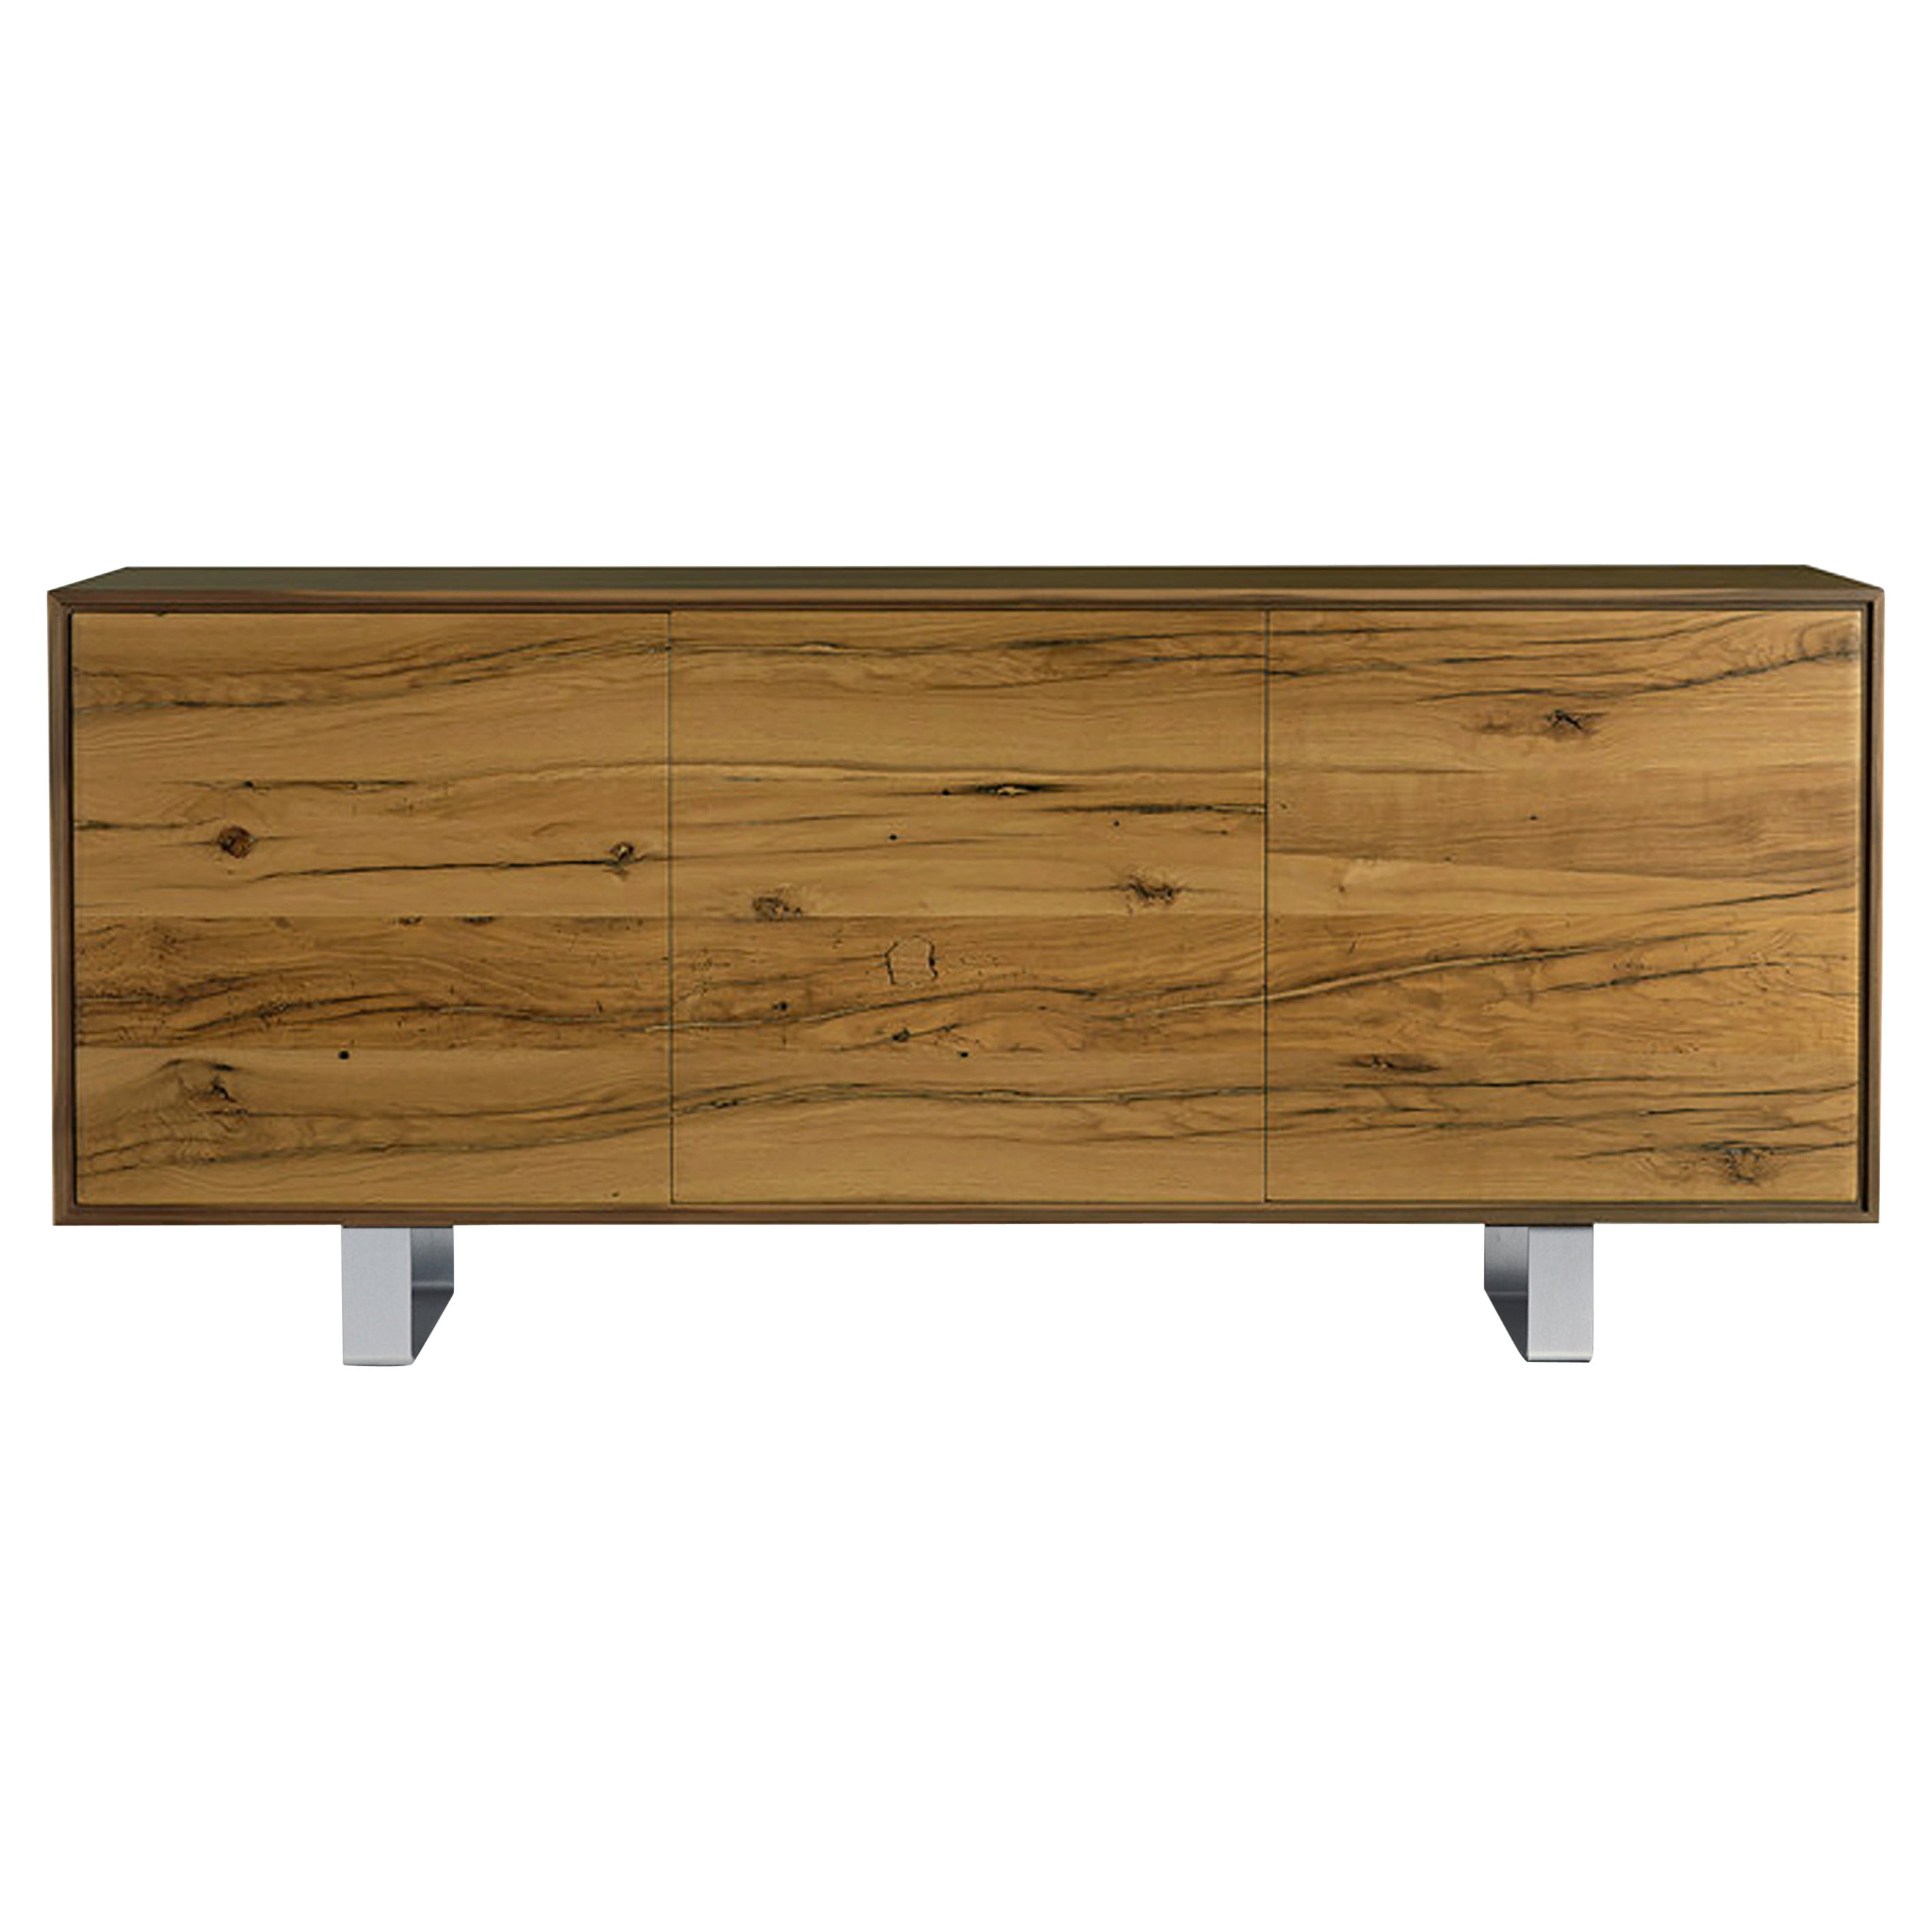 Materia Rovere Solid Wood Sideboard, Oak and Walnut Natural Finish, Contemporary For Sale